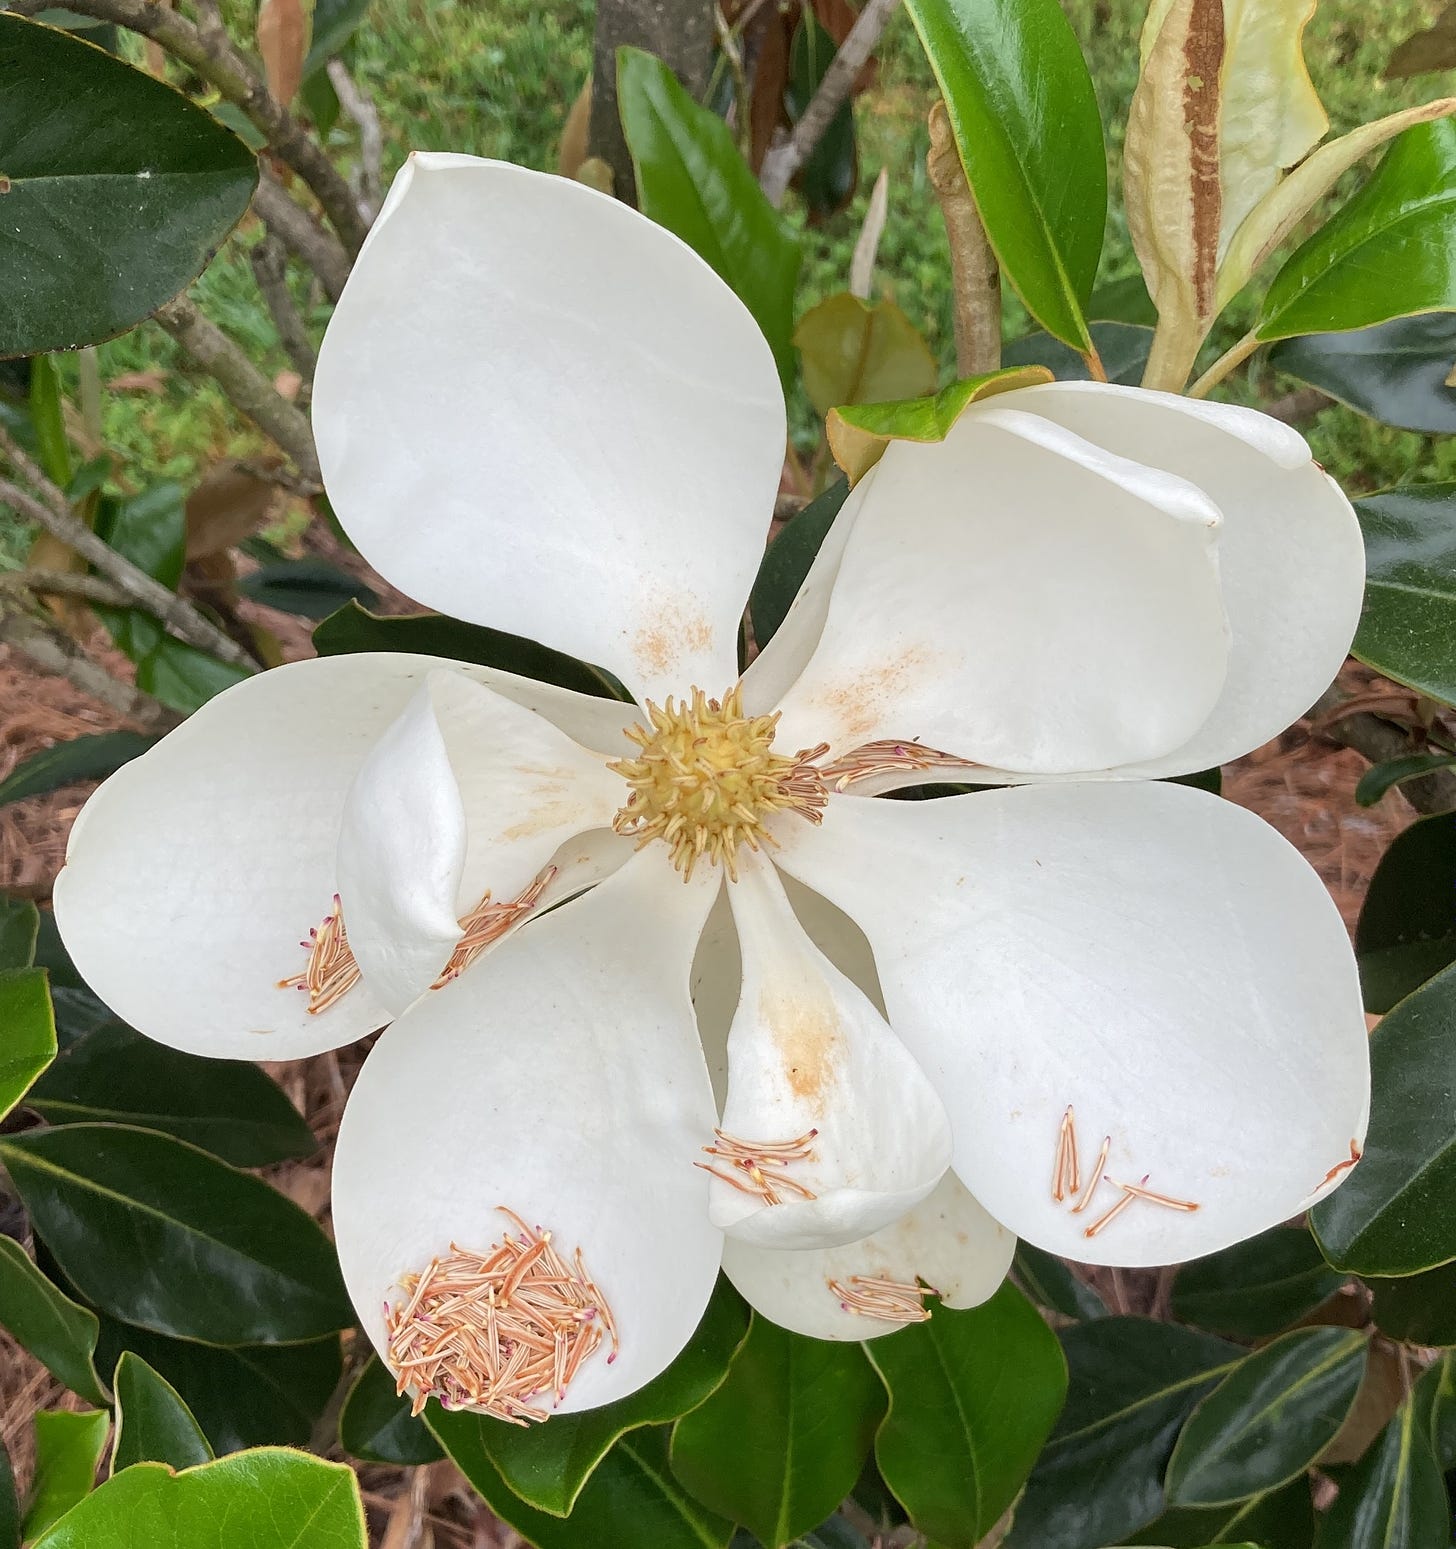 White magnolia flower, fully open, with pine needles caught in its petals